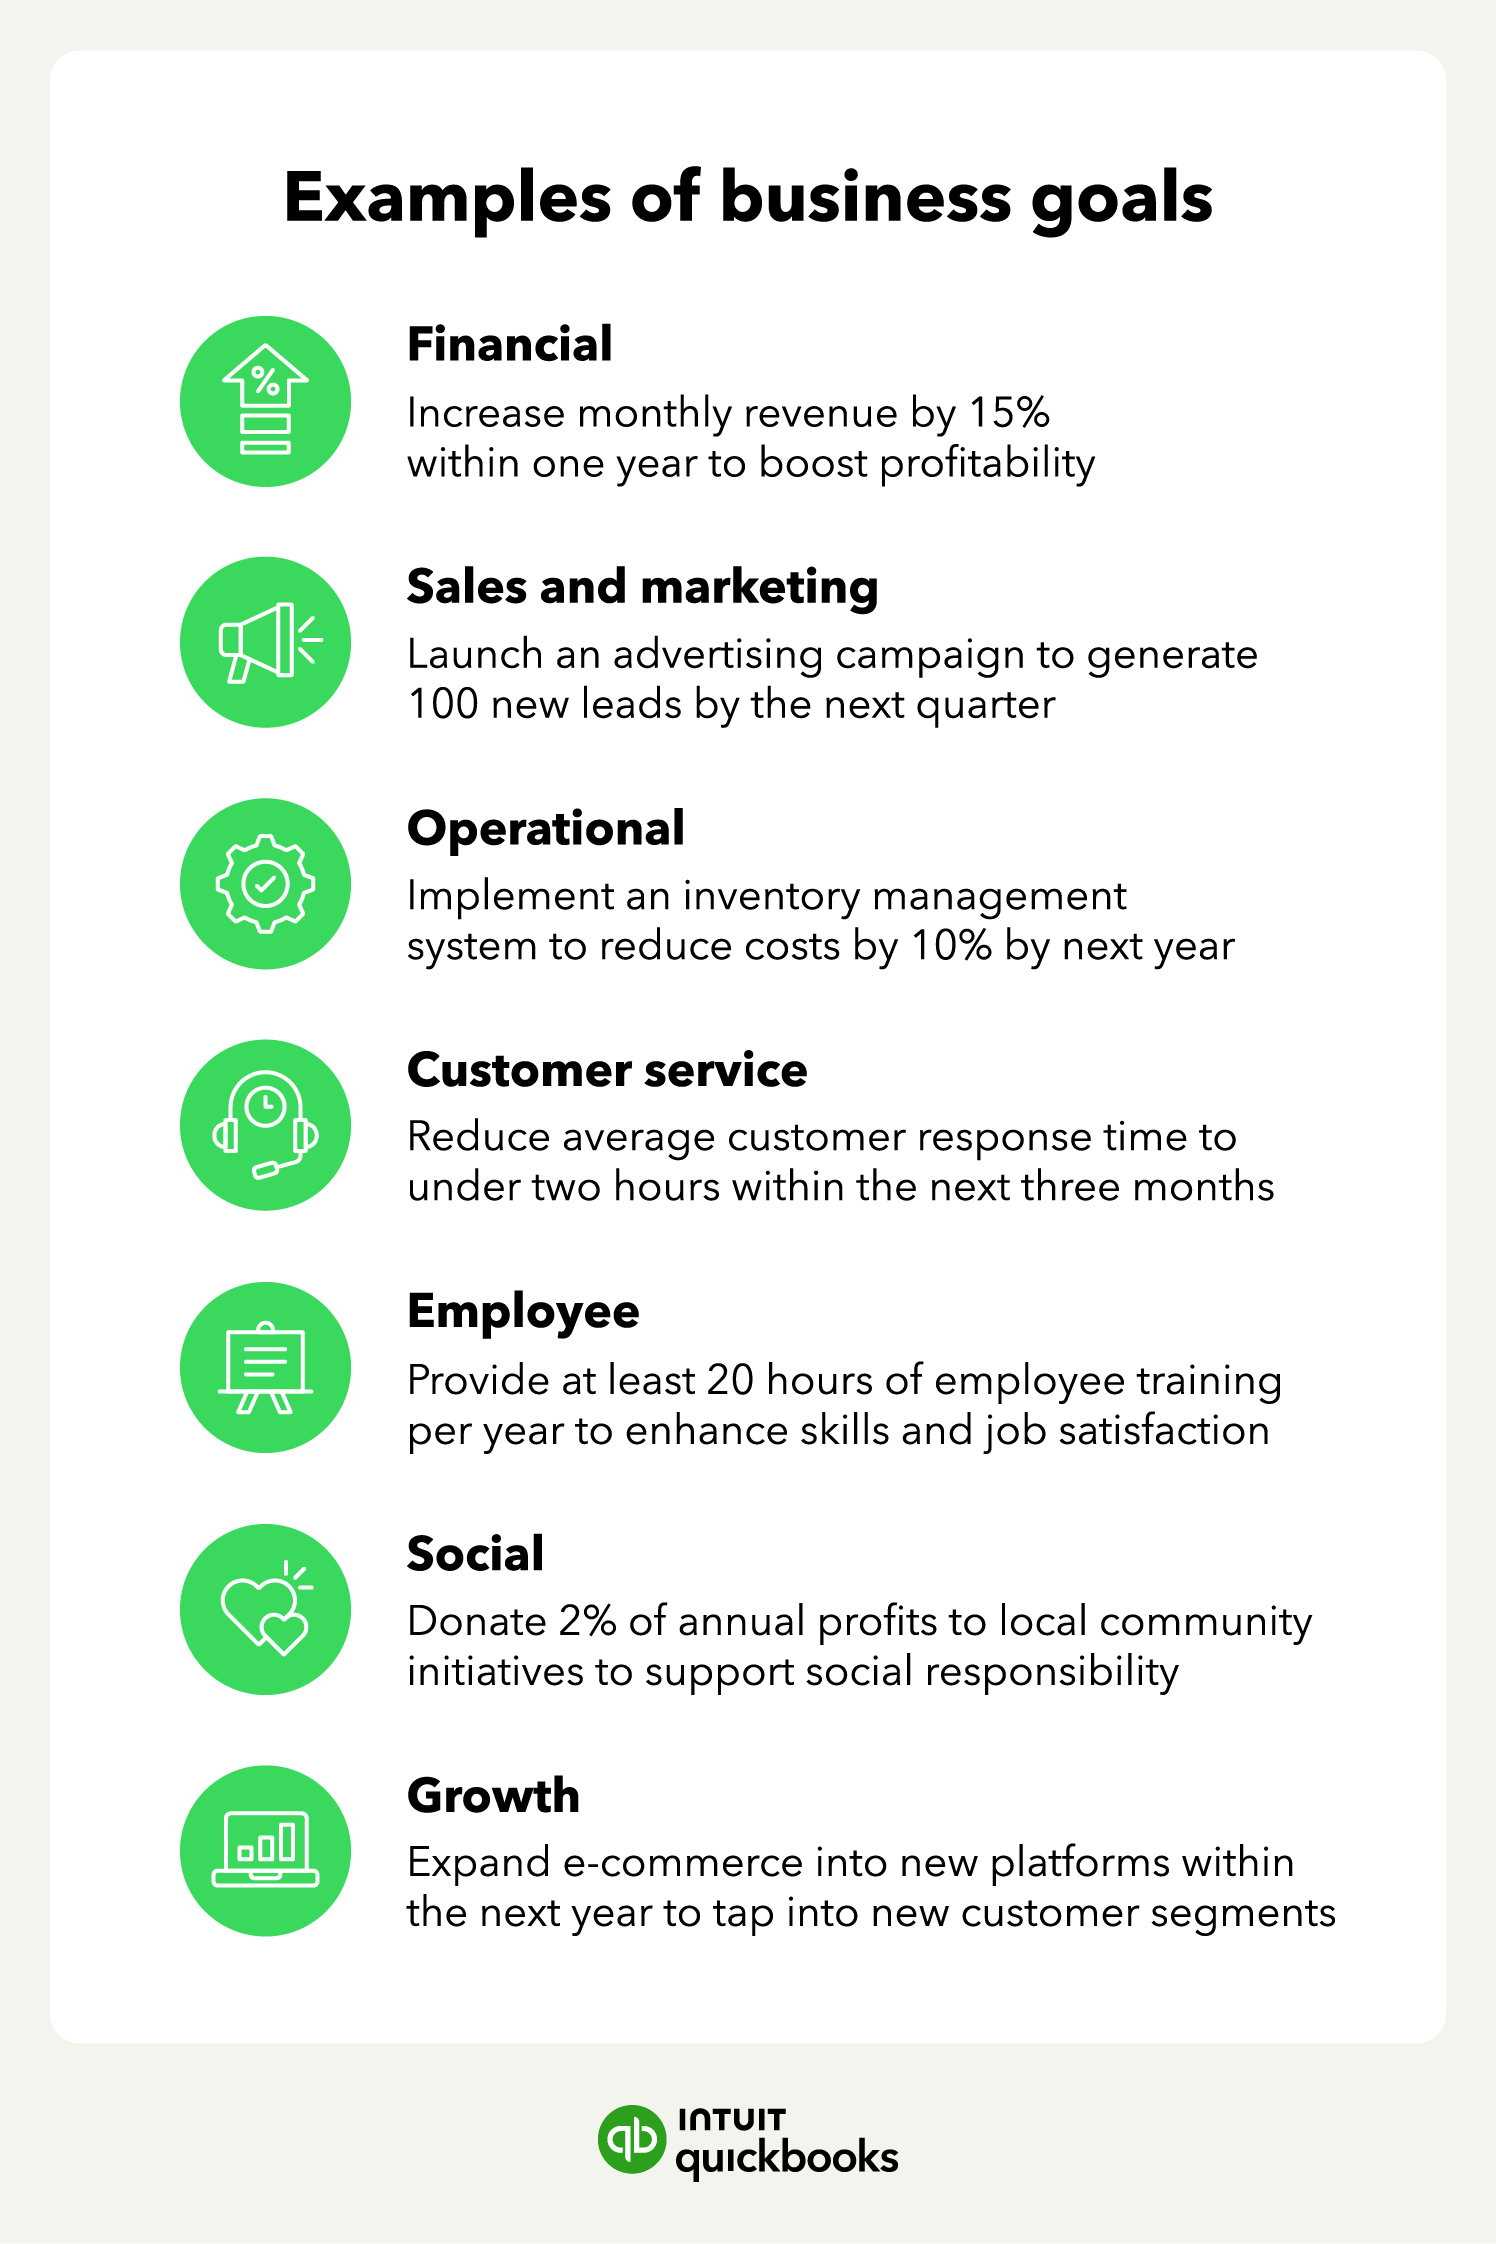 A list of examples of each type of business goal.